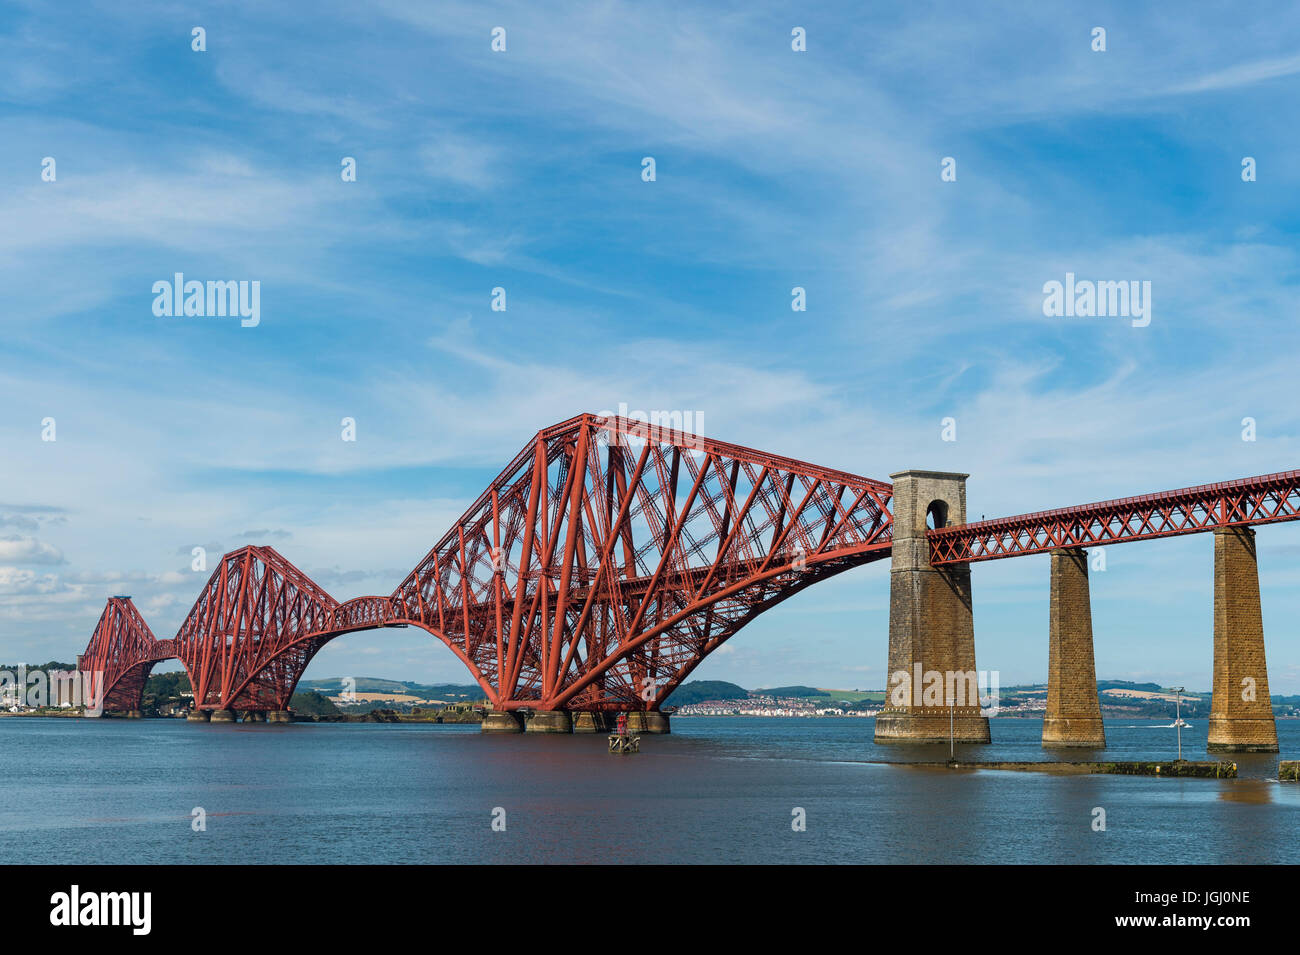 Queensferry, Scotland, Uk - August 15, 2016: The Forth Rail Bridge over the Firth of Forth, South Queensferry. Stock Photo